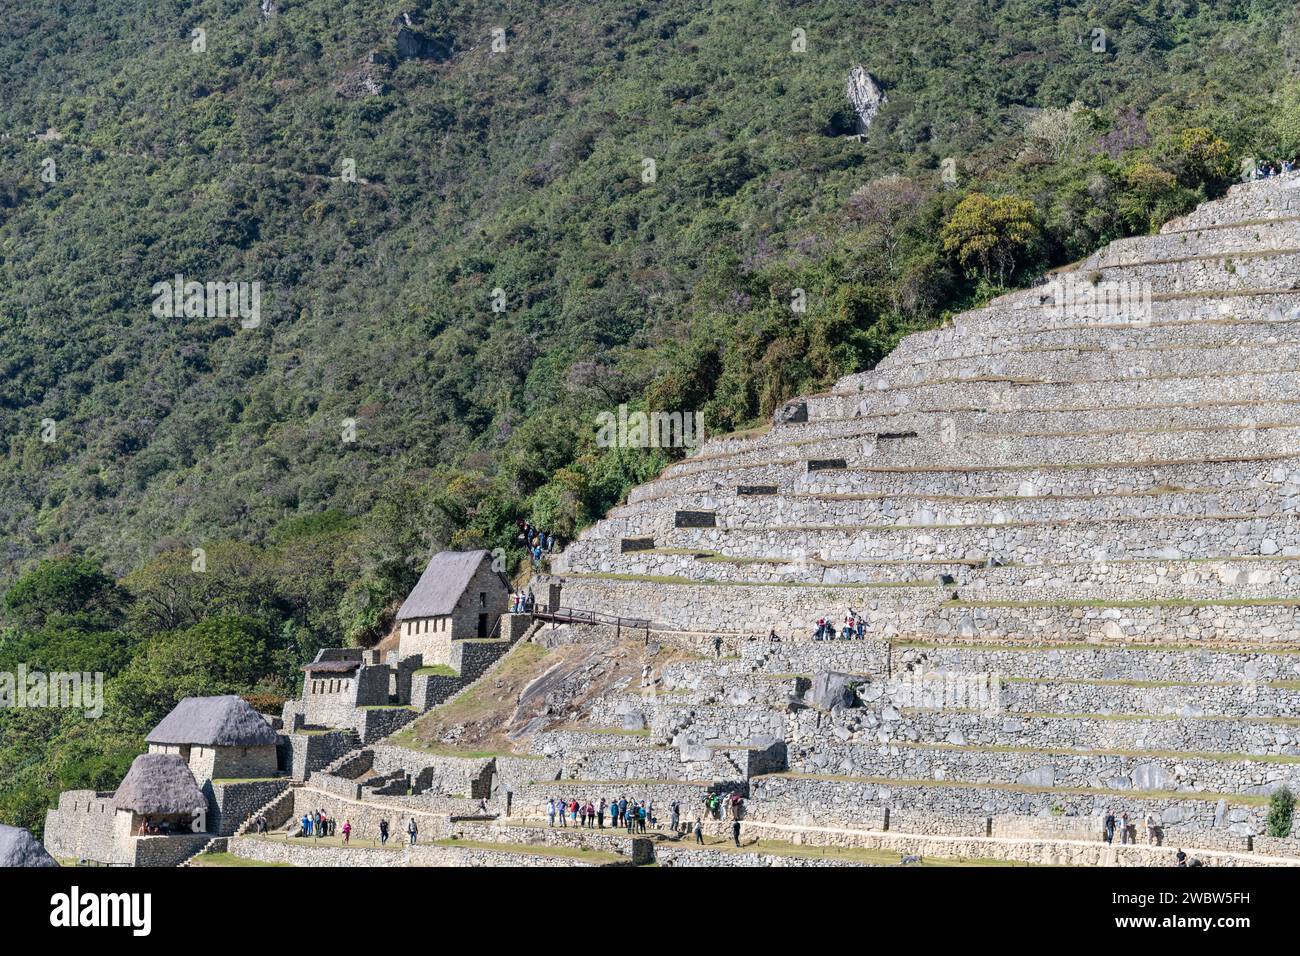 A view of the terraces and ruins of the Machu Picchu citadel in the Sacred Valley in Peru Stock Photo